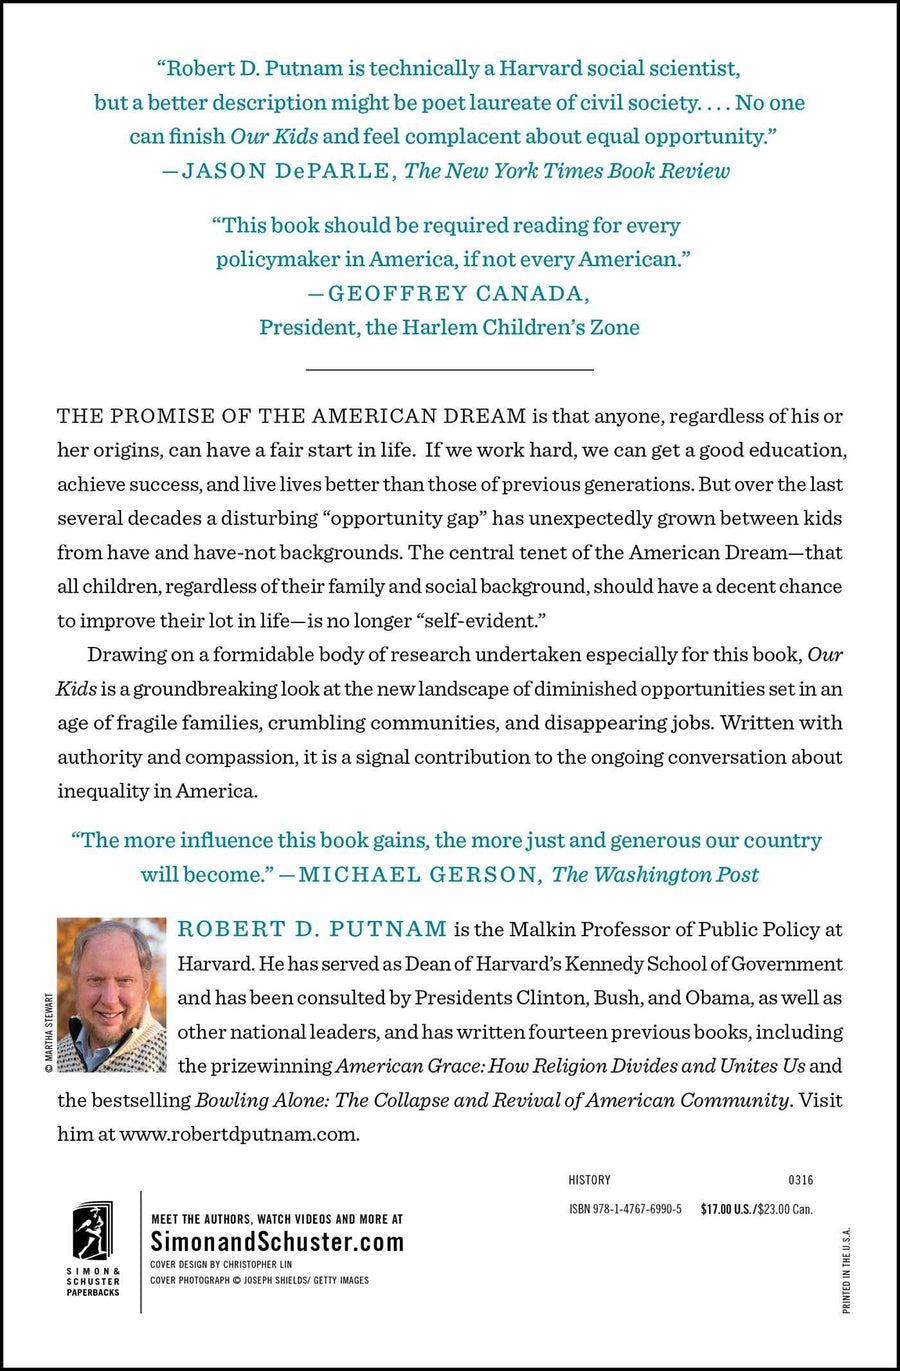 Our Kids: The American Dream in Crisis by Dr. Robert D. Putnam